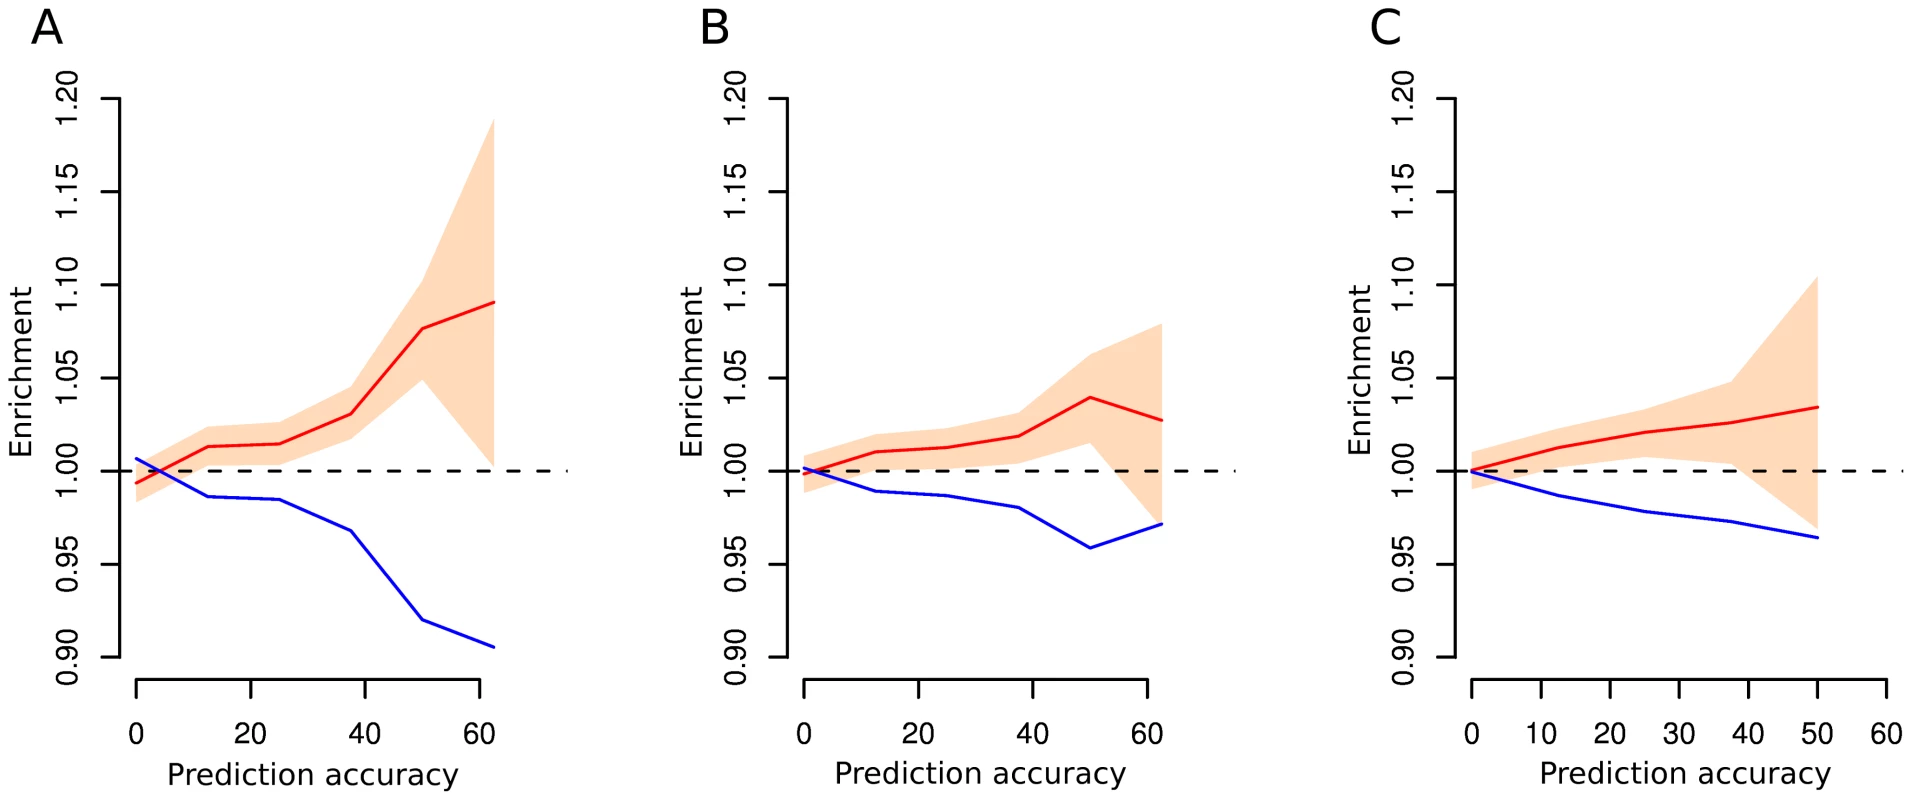 Enrichment of SNPs for different values of prediction accuracy computed on distinct models.